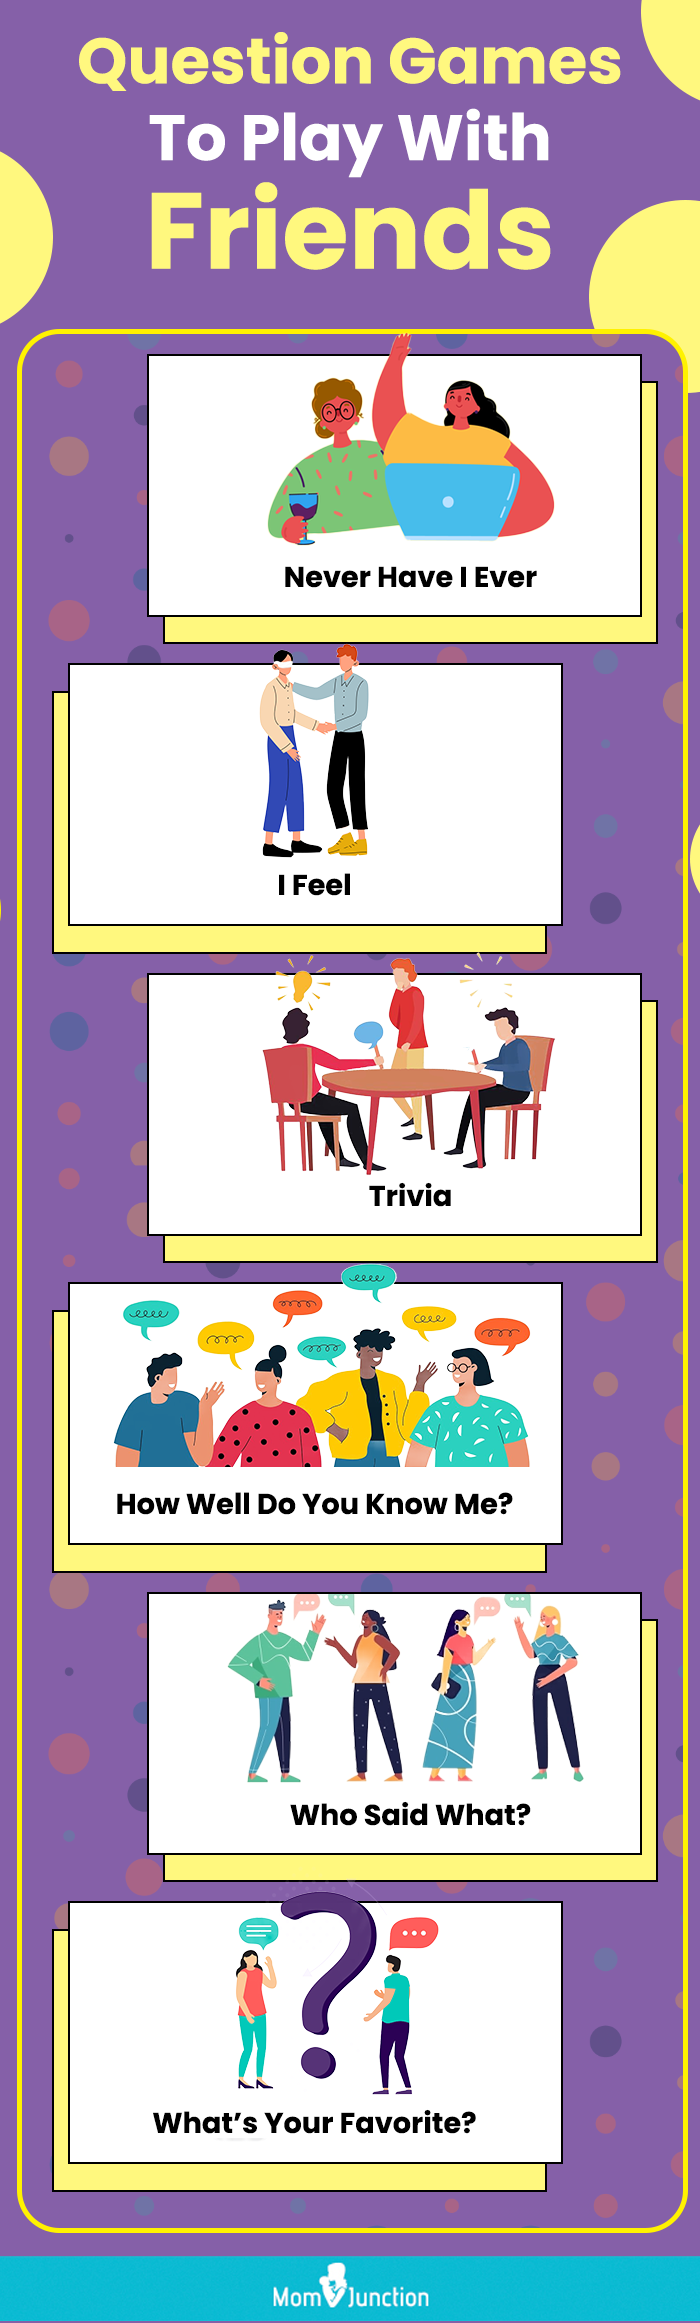 question games for friends to play (infographic)